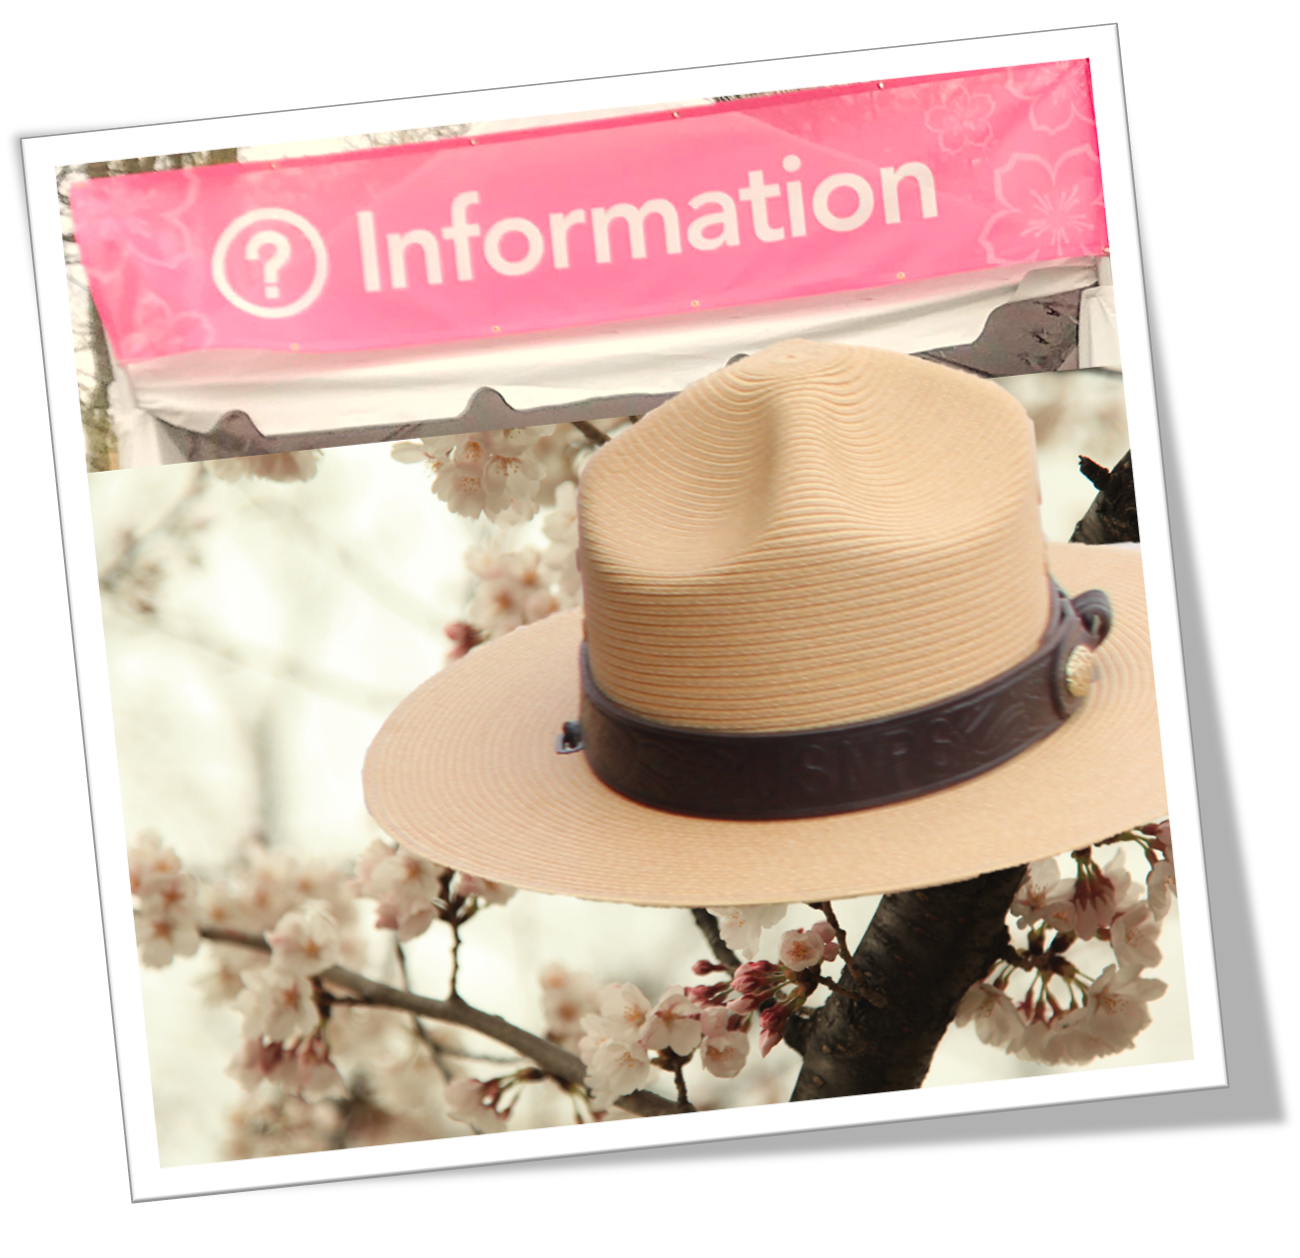 A flat hat on a background of cherry blossoms below a pink Information Tent banner